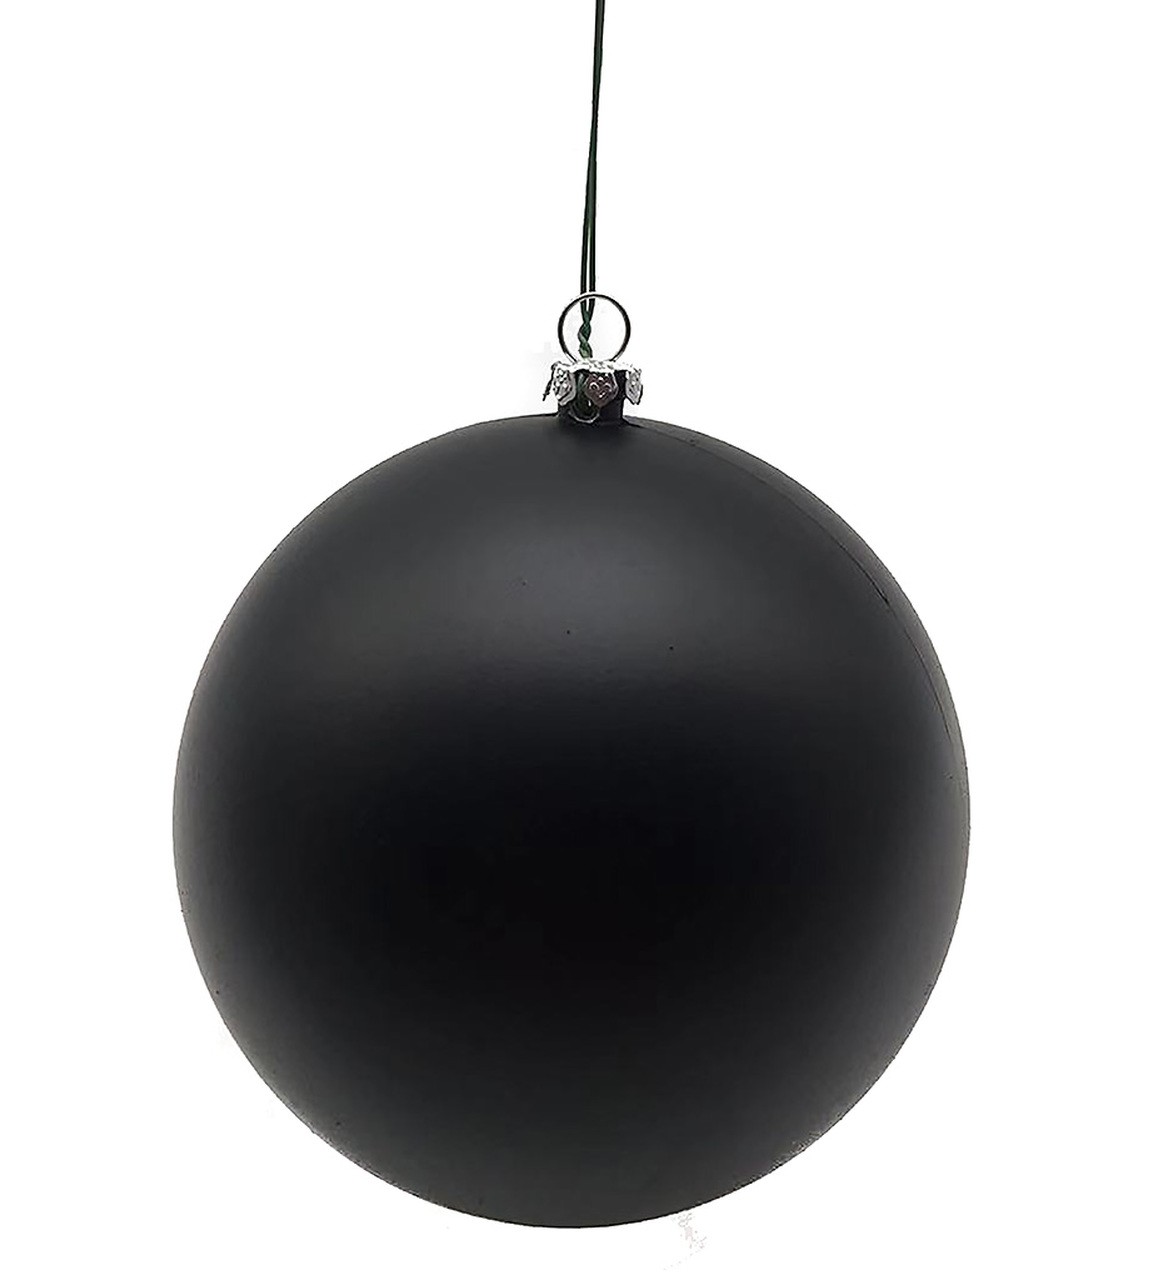 Earthflora > Christmas Tree Ornaments and Trimmings > Matte Black Ball  Ornaments